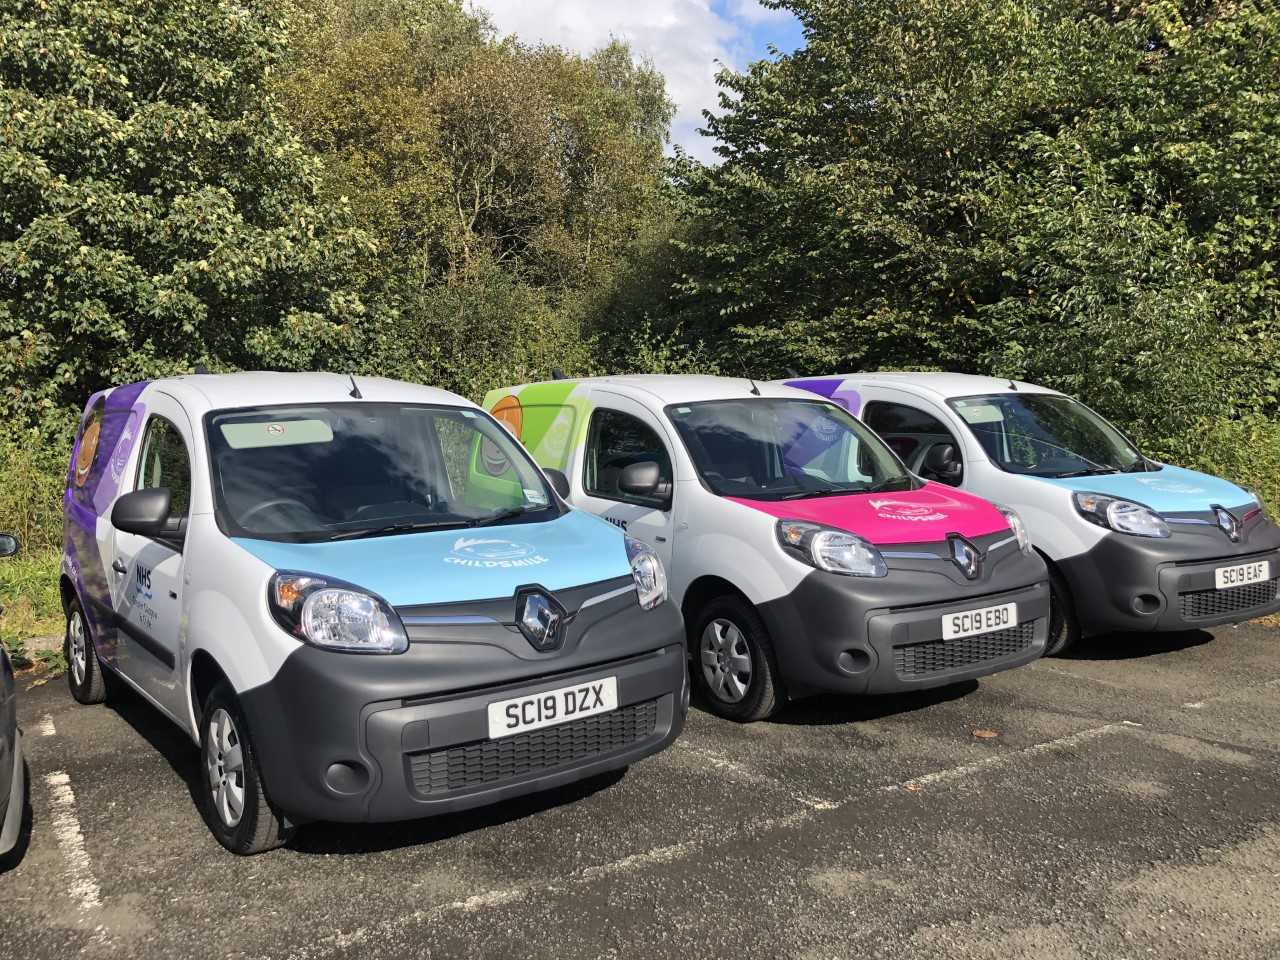 West Yorkshire electric vehicle trial scheme launched